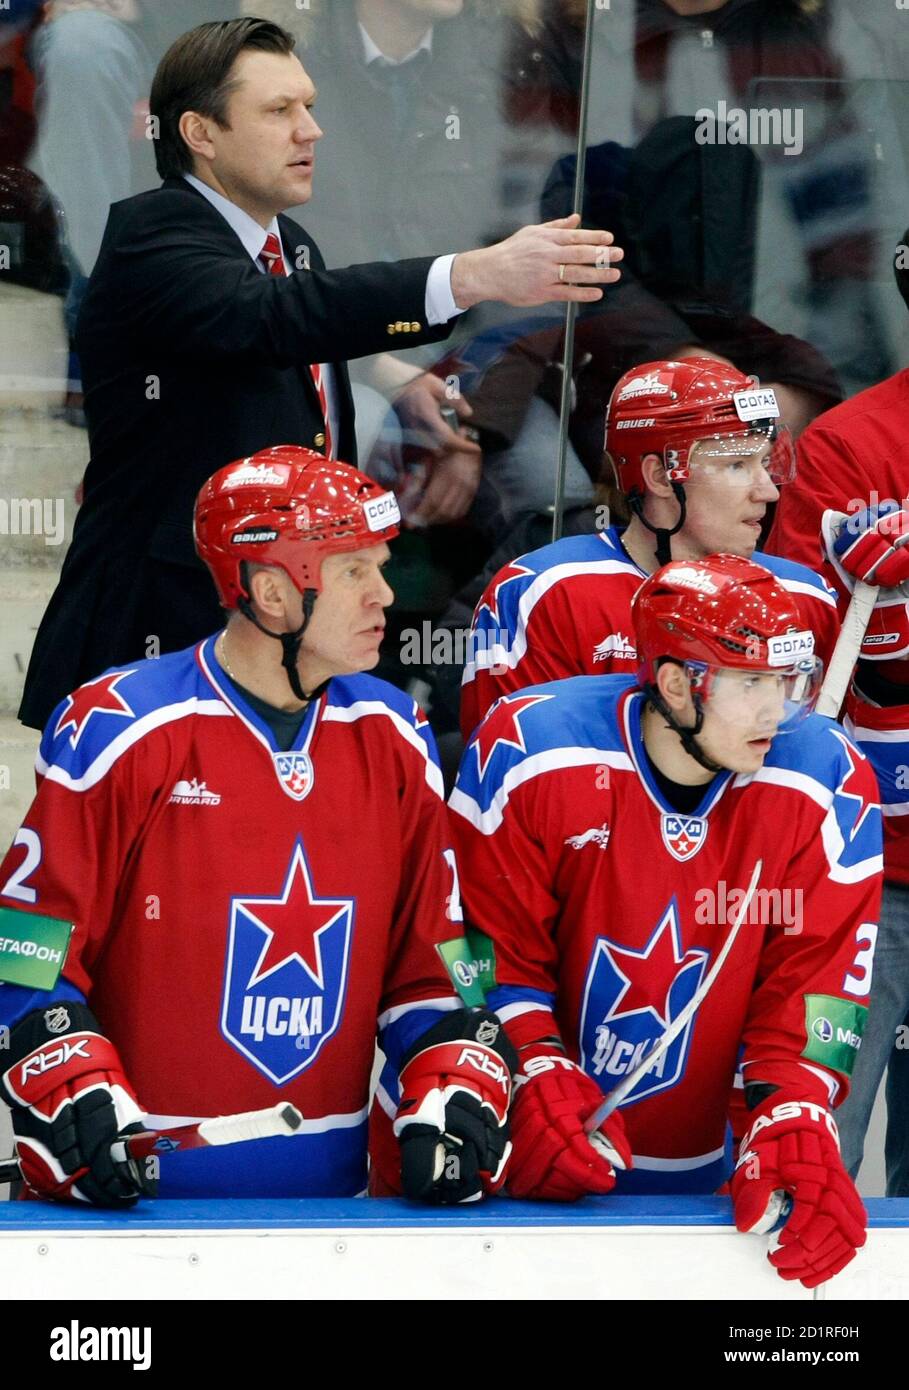 Vyacheslav Fetisov (L) of CSKA Moscow and his teammates watch during their  KHL hockey game against SKA St Petersburg in Moscow, December 11, 2009.  Fetisov, aged 51, Senator for the Primorsky Kray